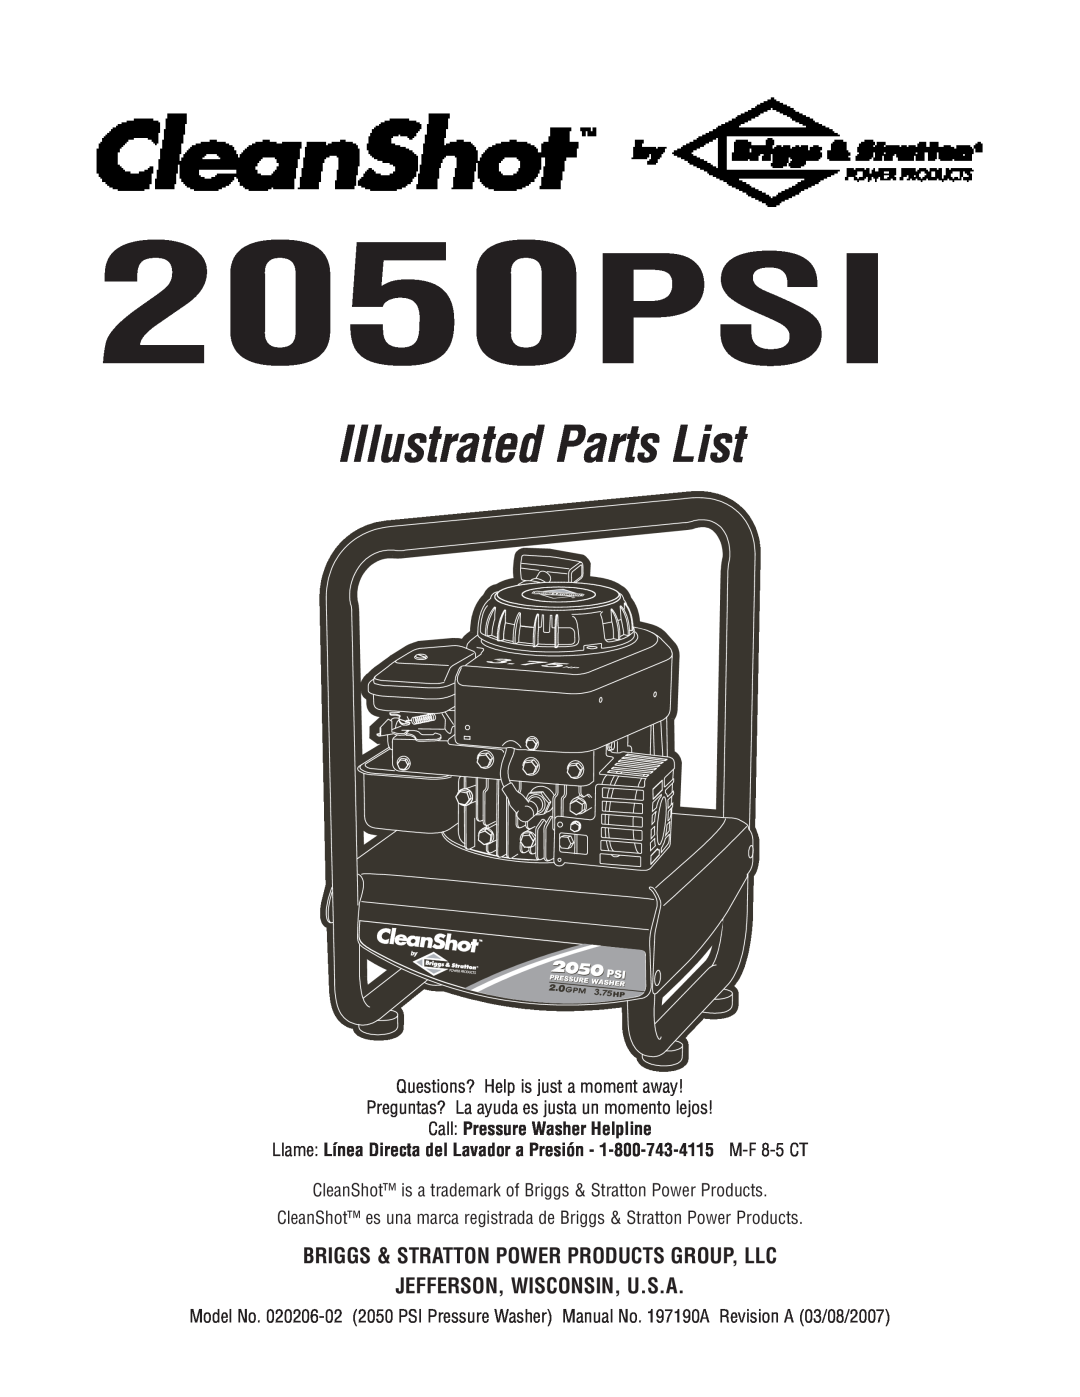 Briggs & Stratton 020206-02 manual 2050PSI, Illustrated Parts List, Briggs & Stratton Power Products Group, Llc 